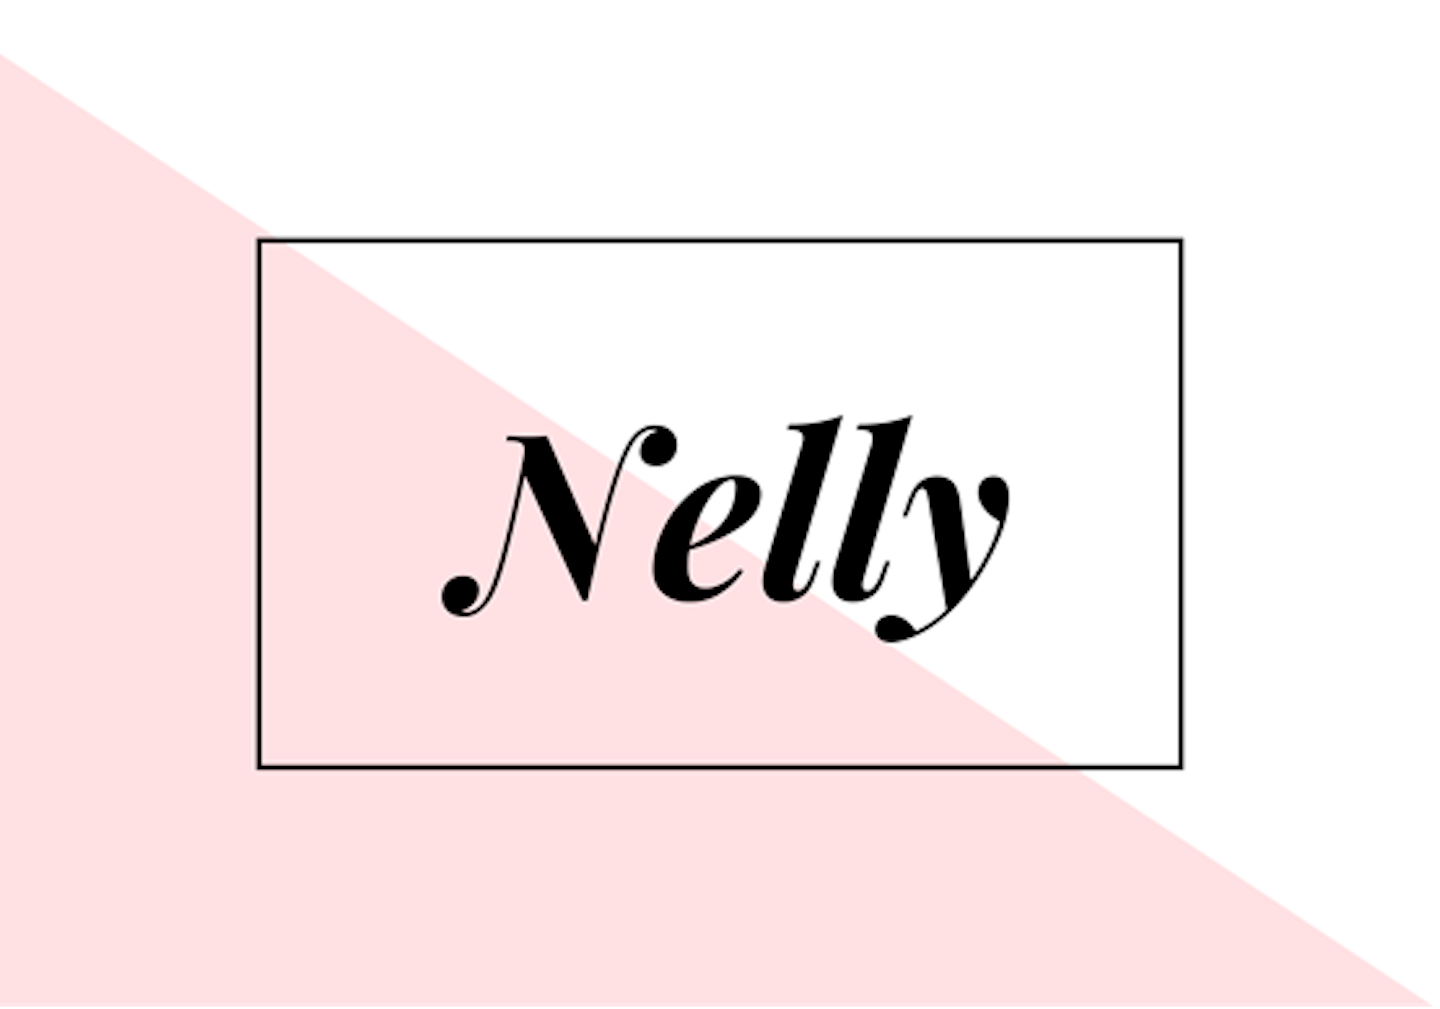 20) Nelly